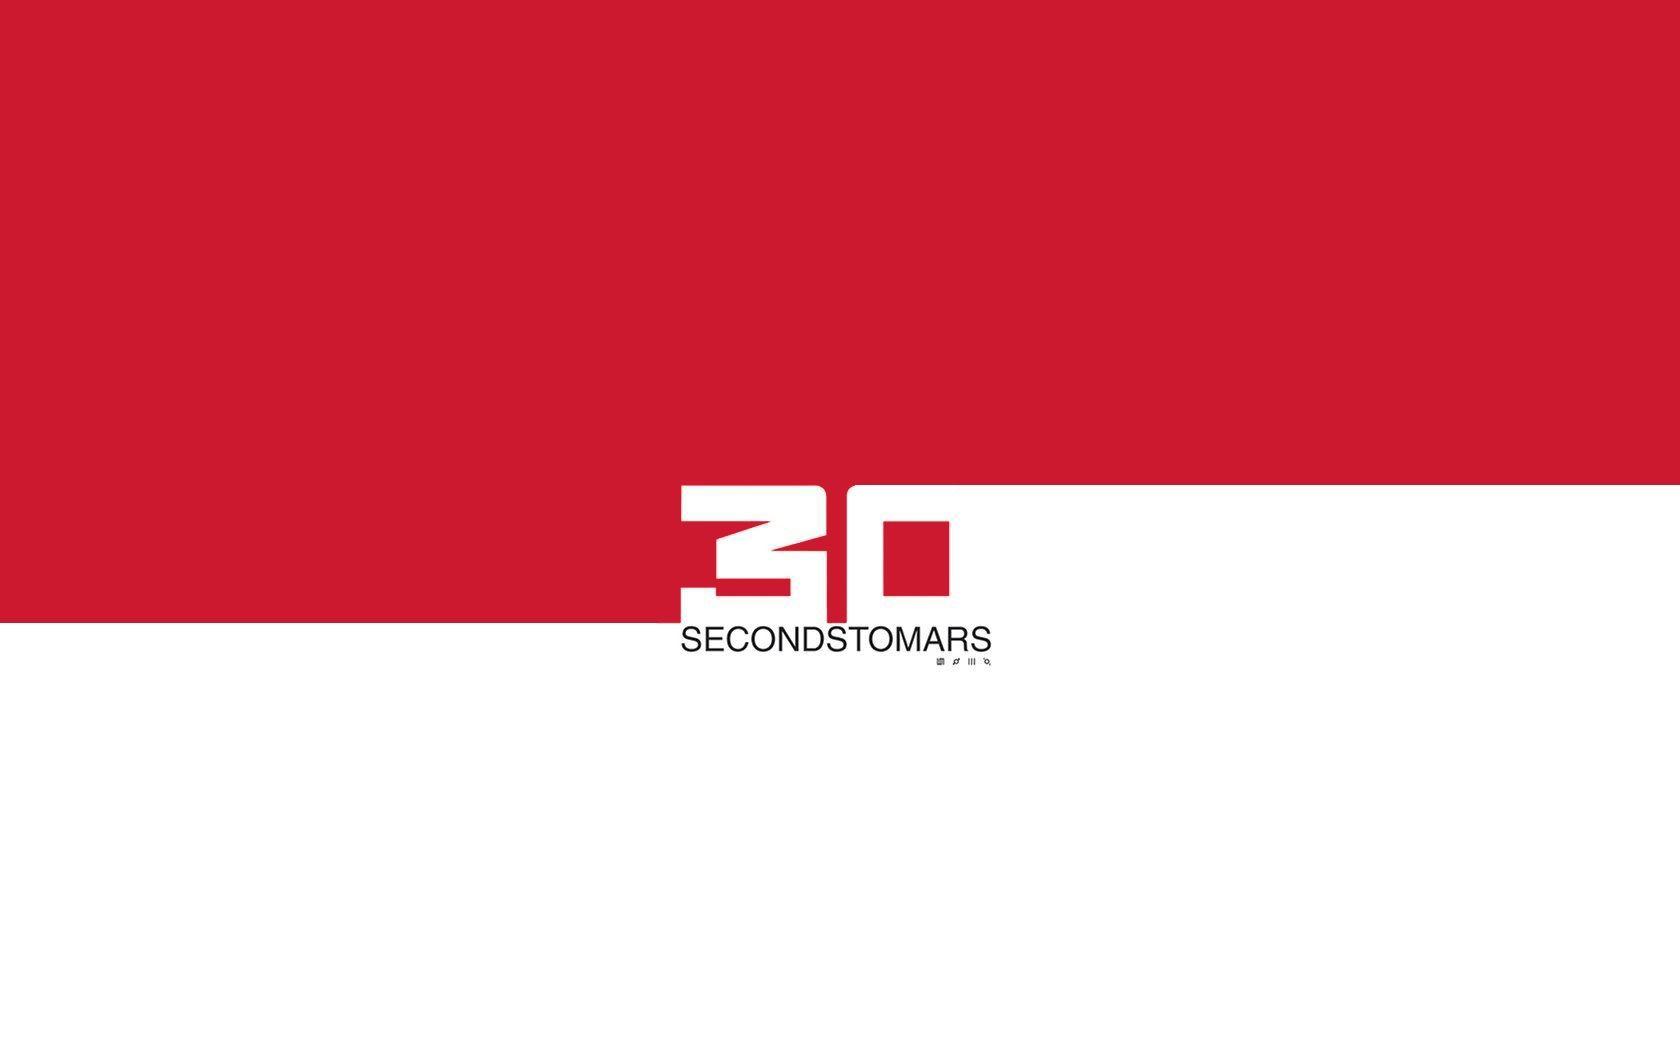 Red Numbers Logo - Wallpaper : red, text, numbers, logo, brand, 30 seconds to mars ...